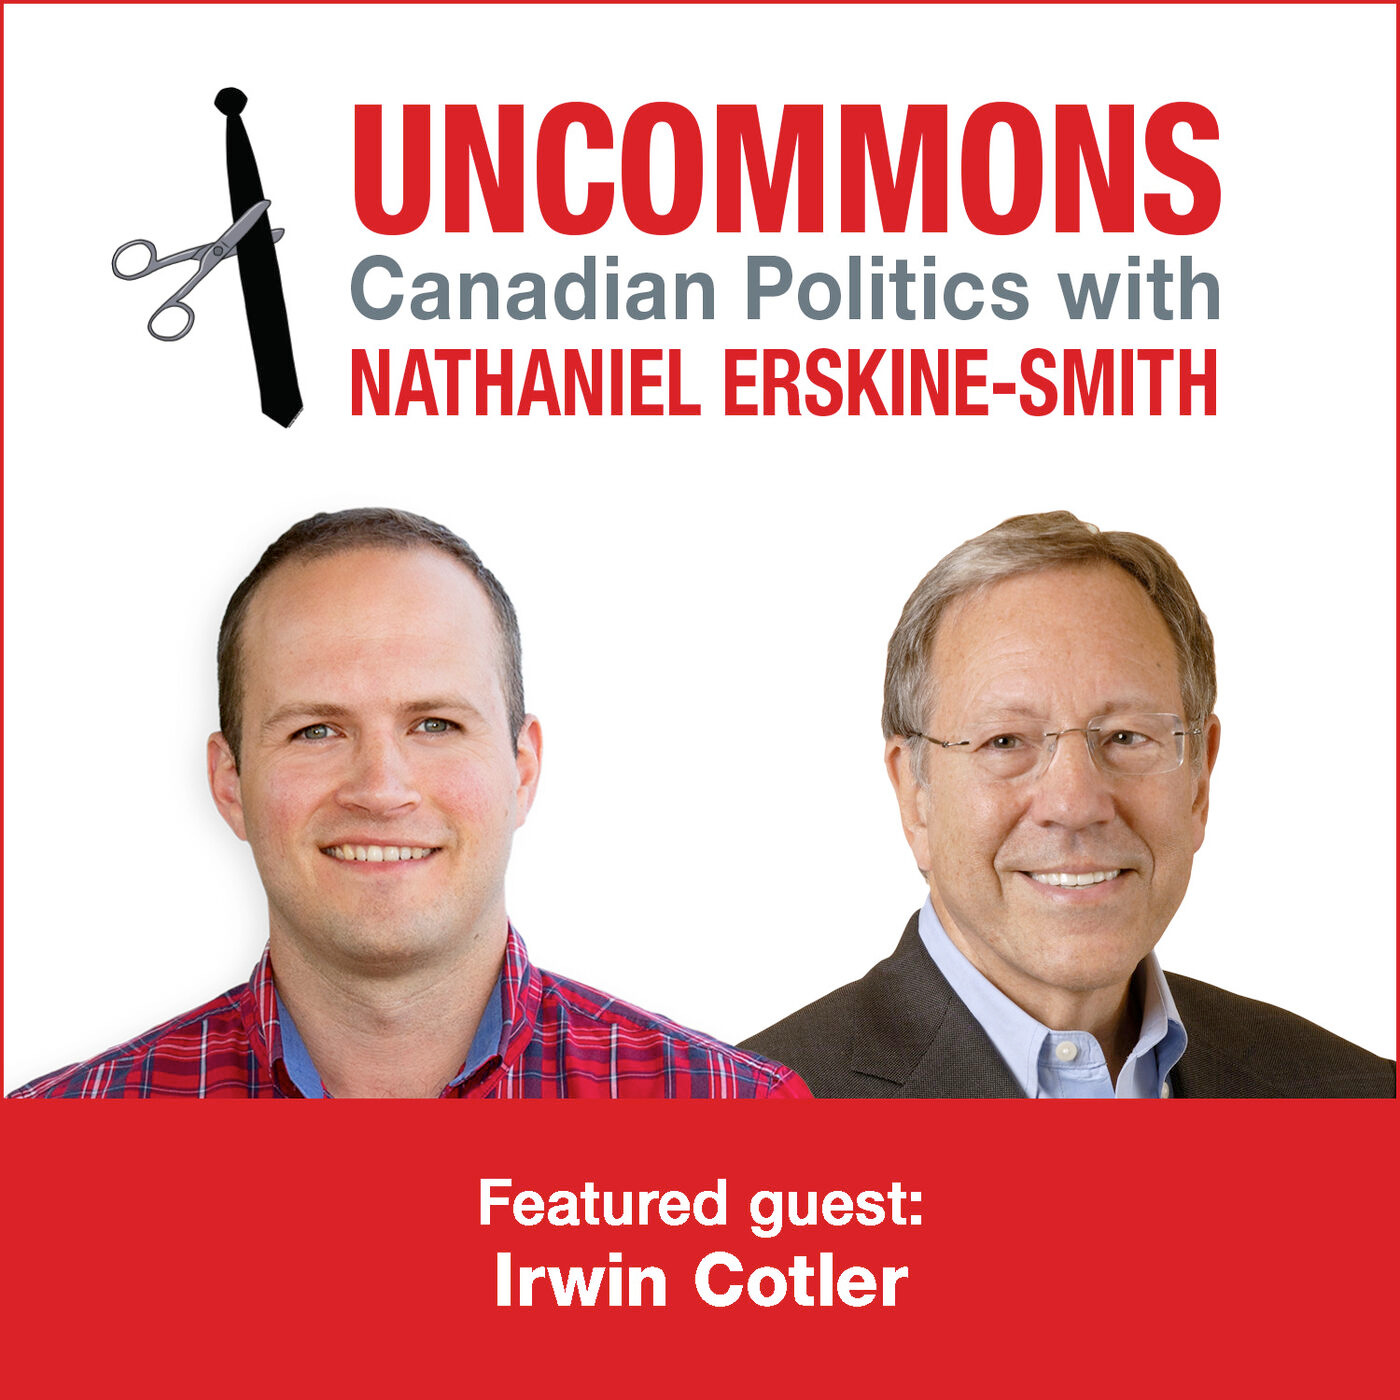 Human rights around the world with Irwin Cotler